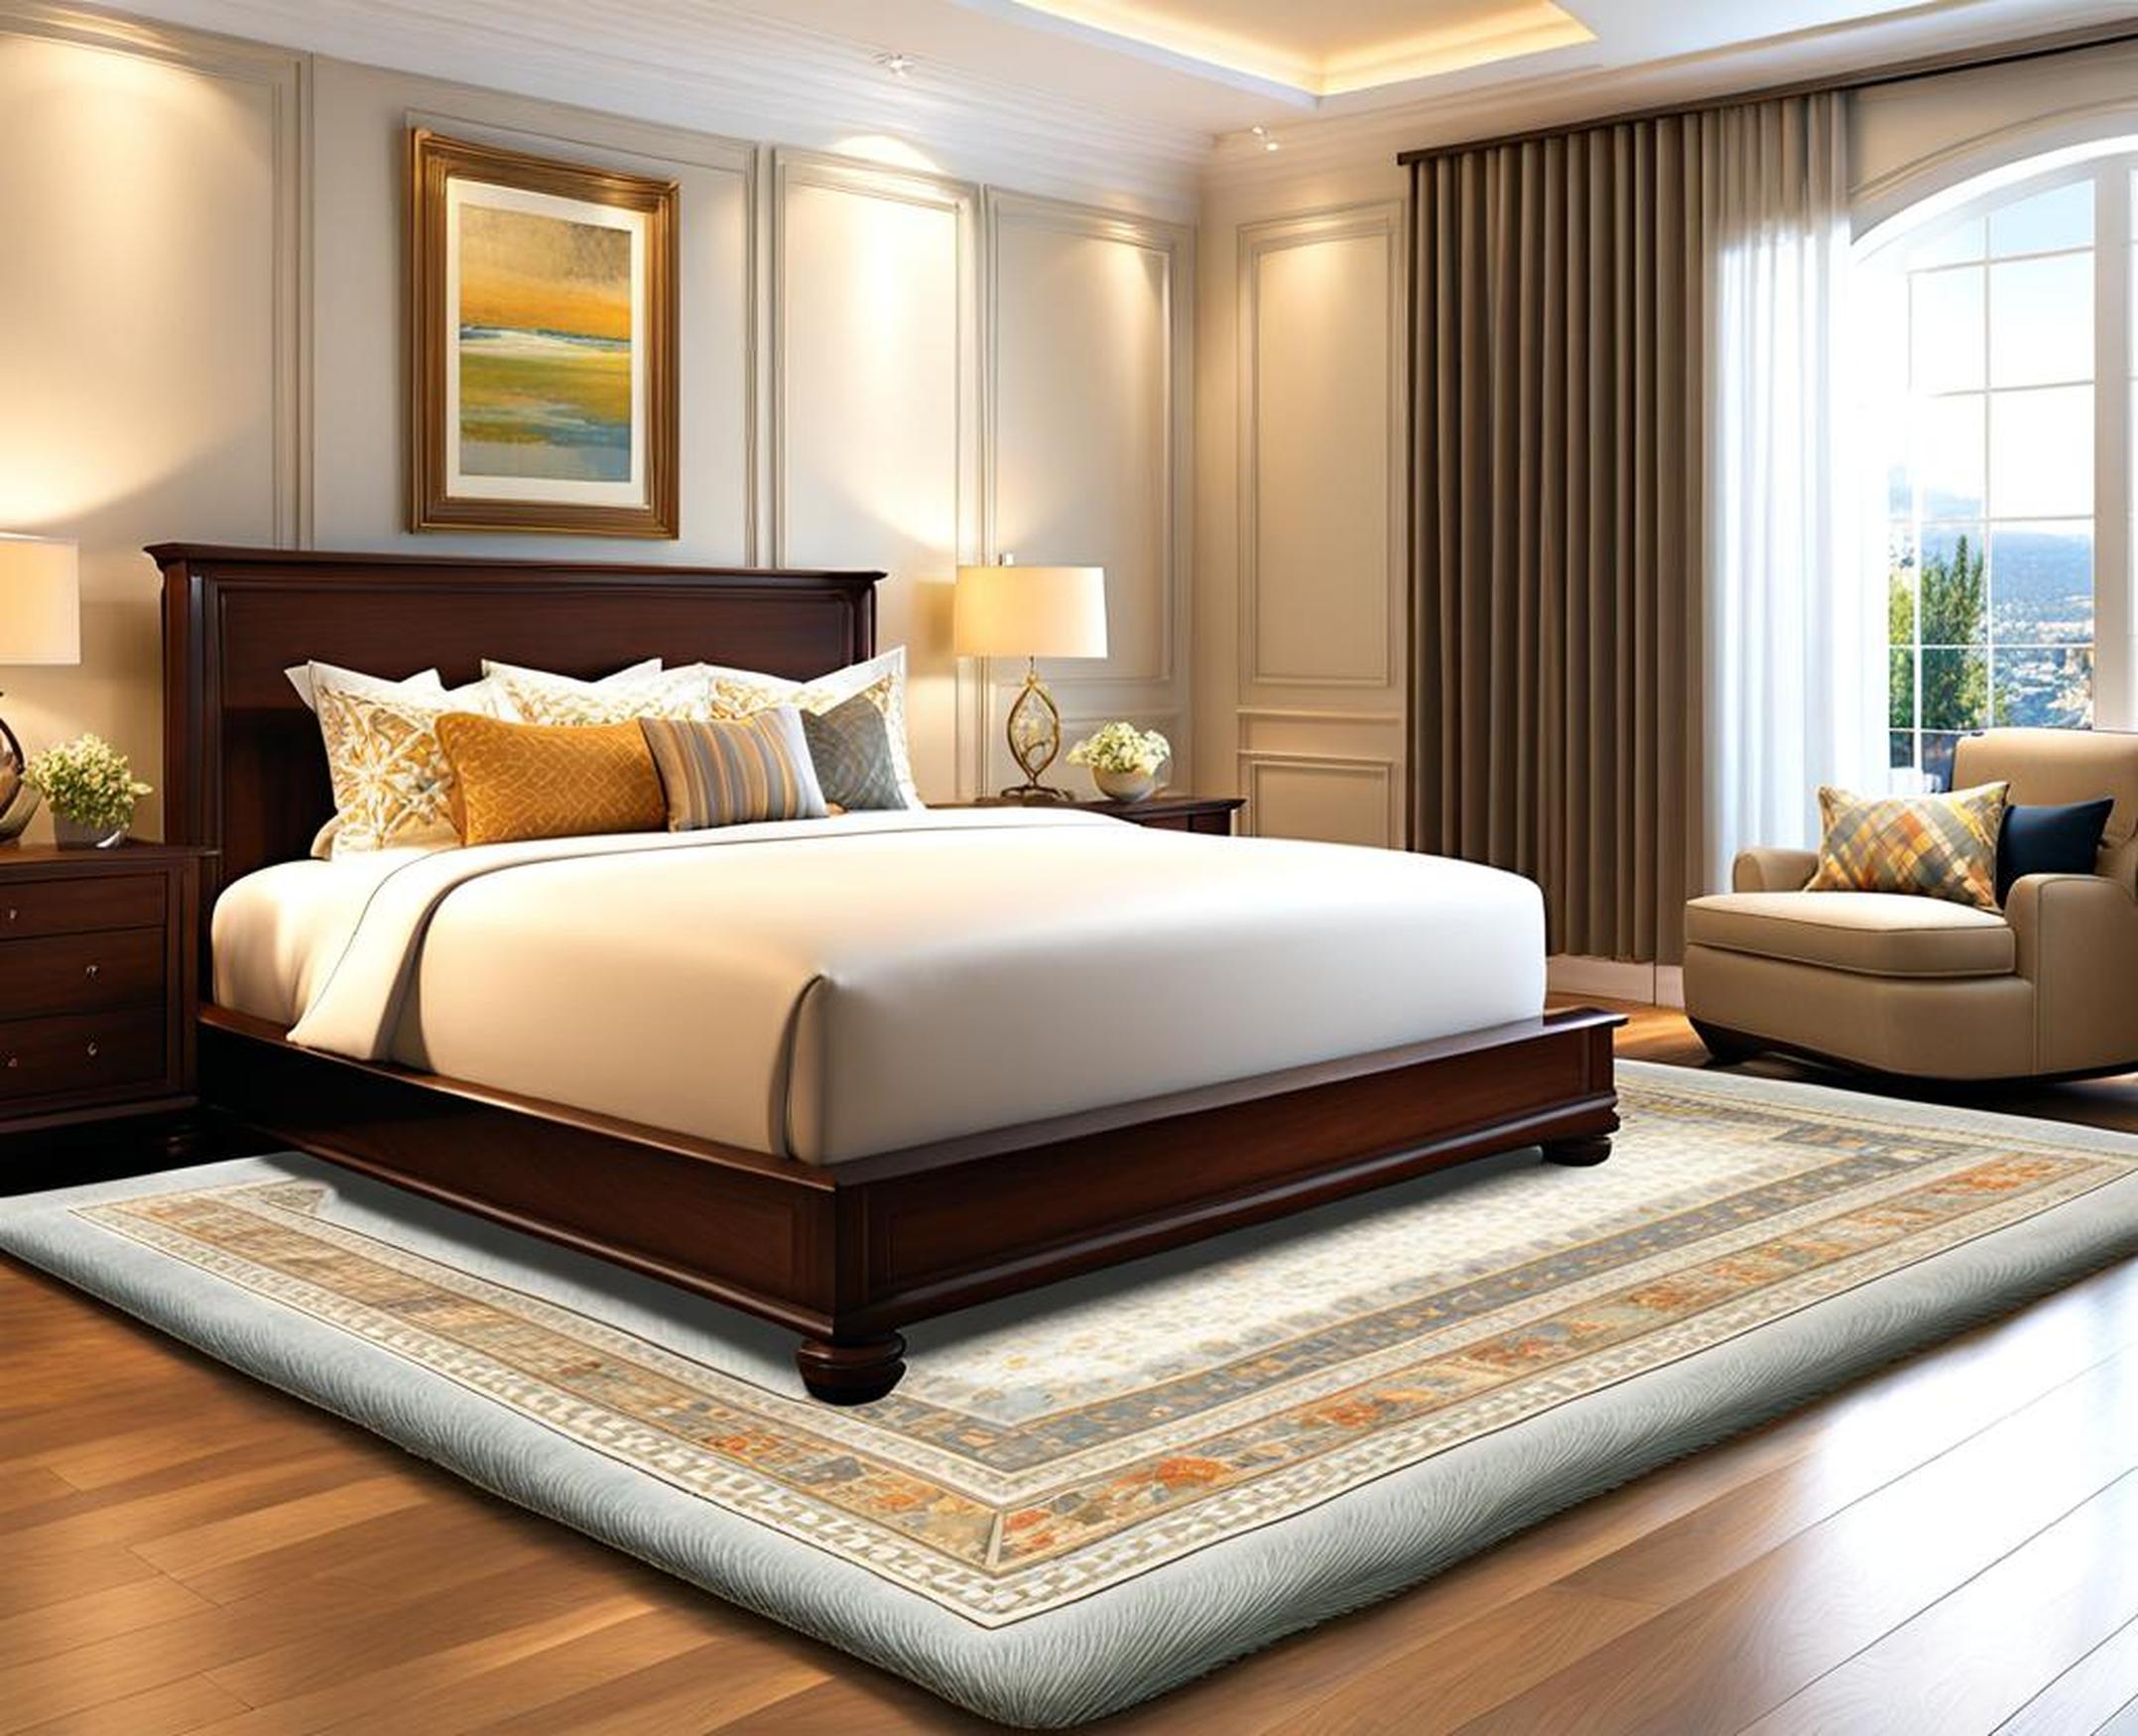 size of rug for king bed